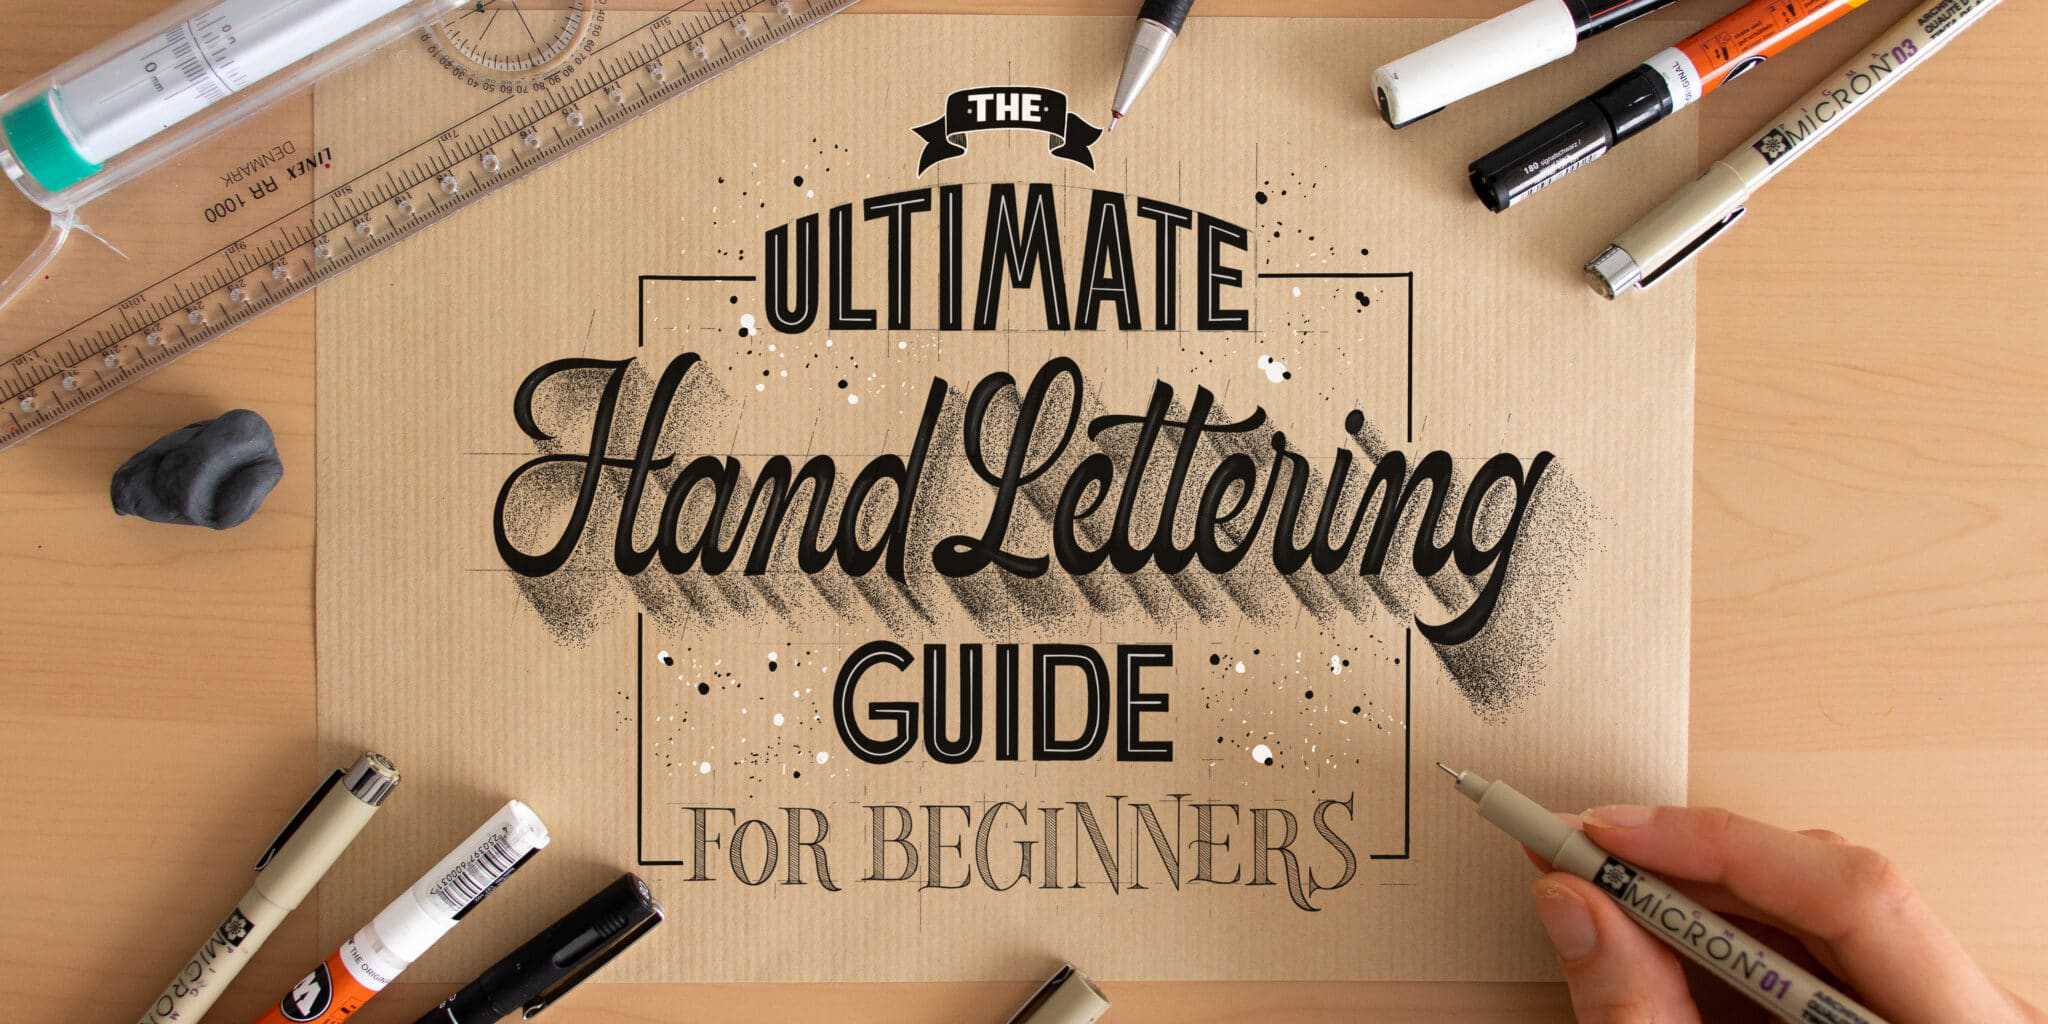 How to Hand Letter: for Beginners 